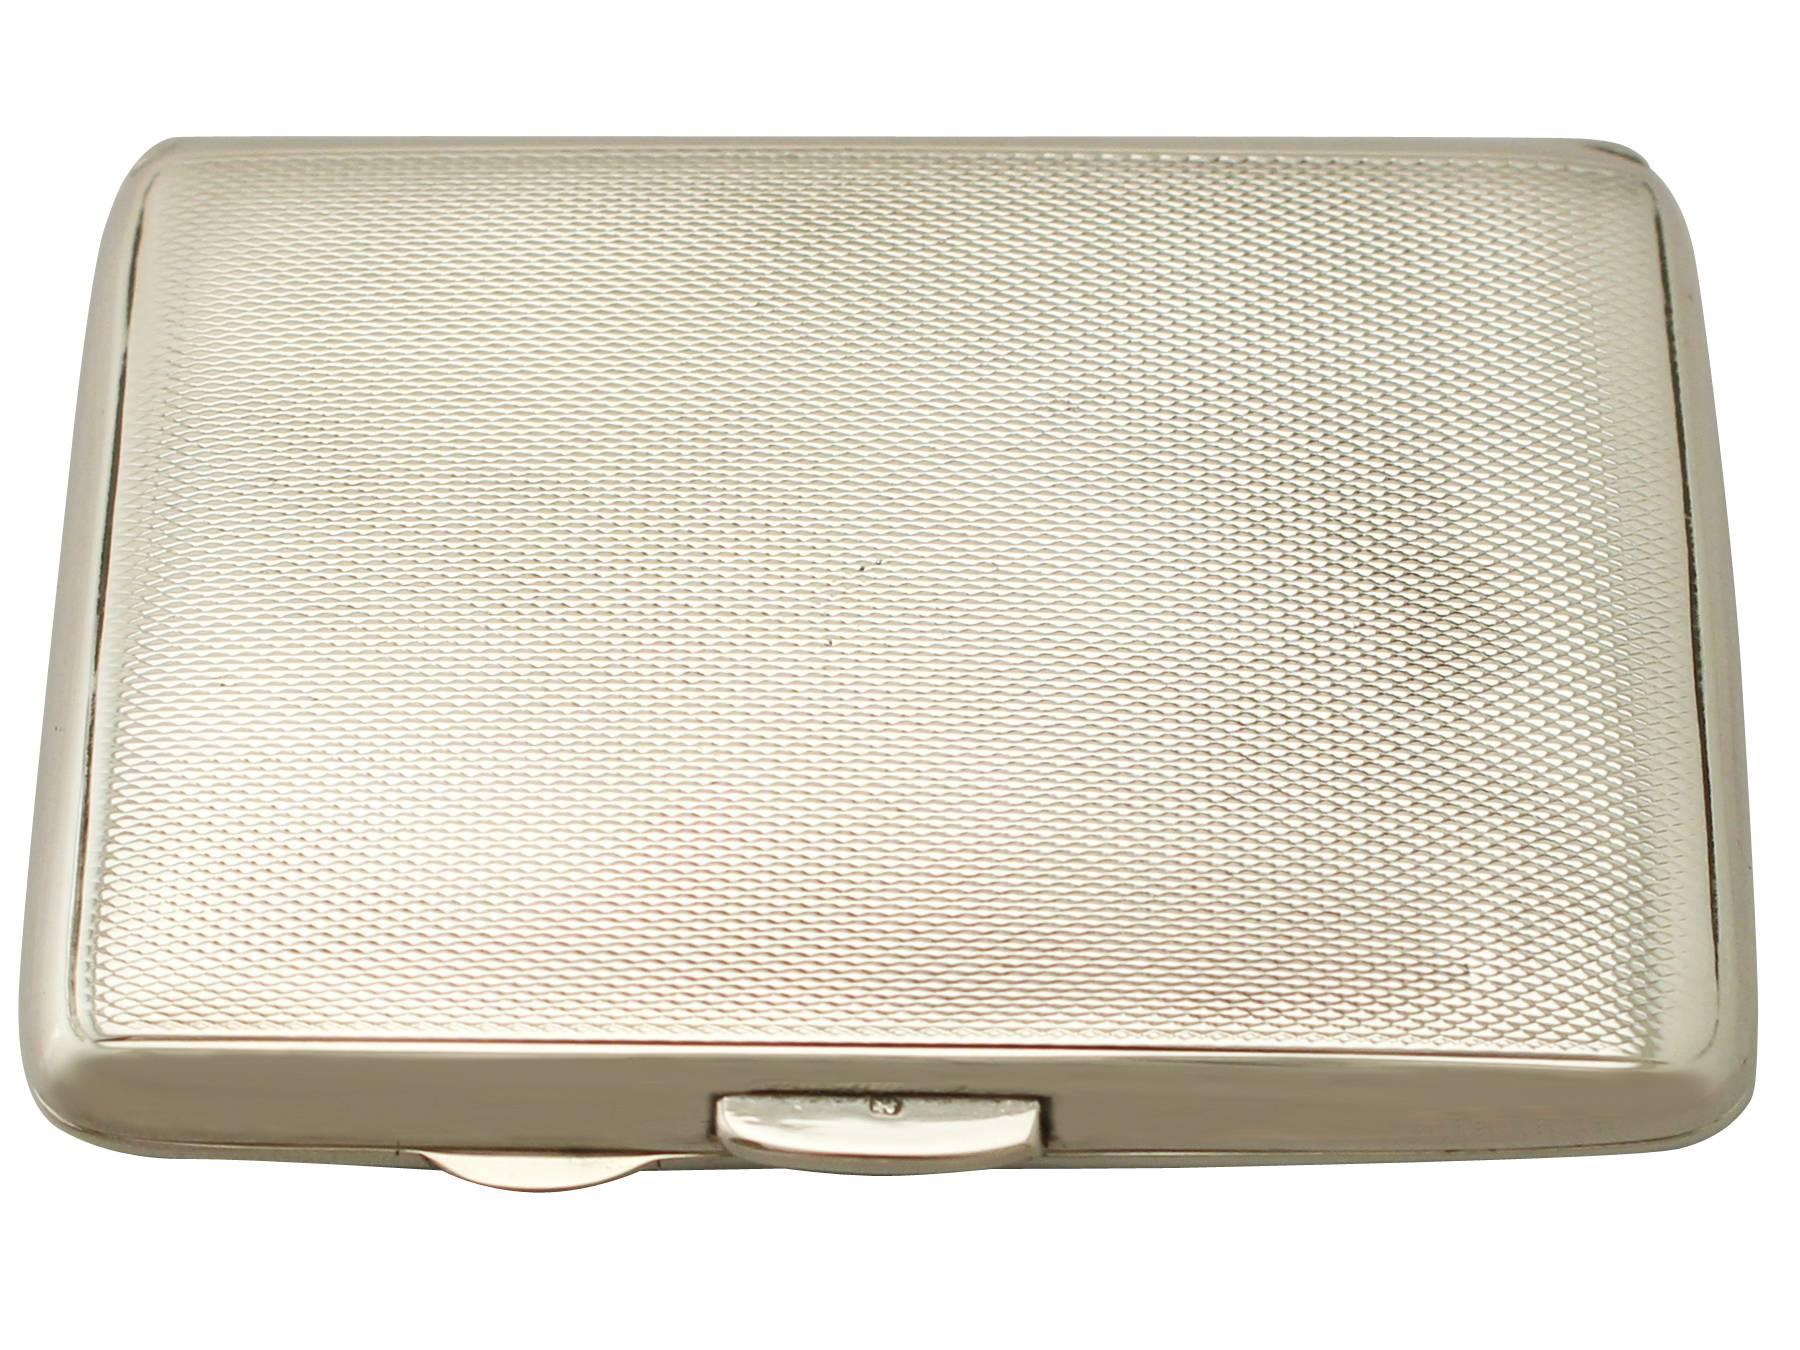 An exceptional, fine and impressive antique Edward VIII English sterling silver and enamel cigarette case; an addition to our silver smoking related silverware collection.

This exceptional antique Edwardian sterling silver cigarette case has a